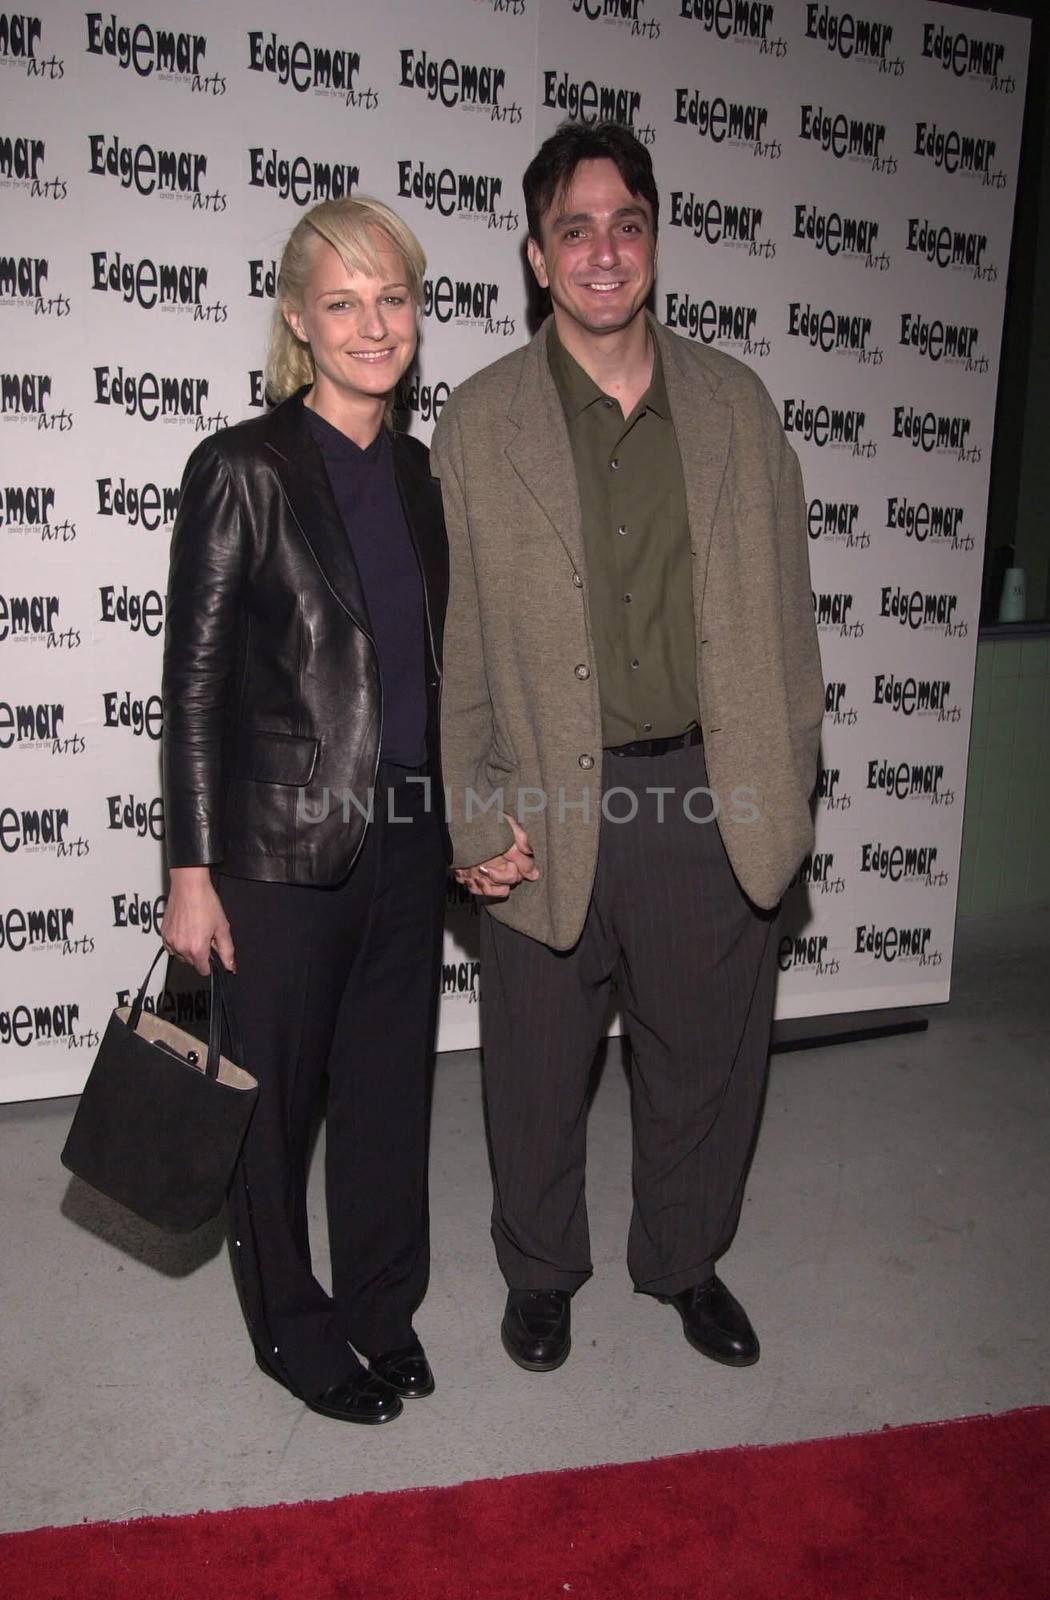 Helen Hunt and Hank Azaria at the "Starry Starry Night" fundraiser to benefit the Edgemar Center for the Arts. Santa Monica, 04-15-00